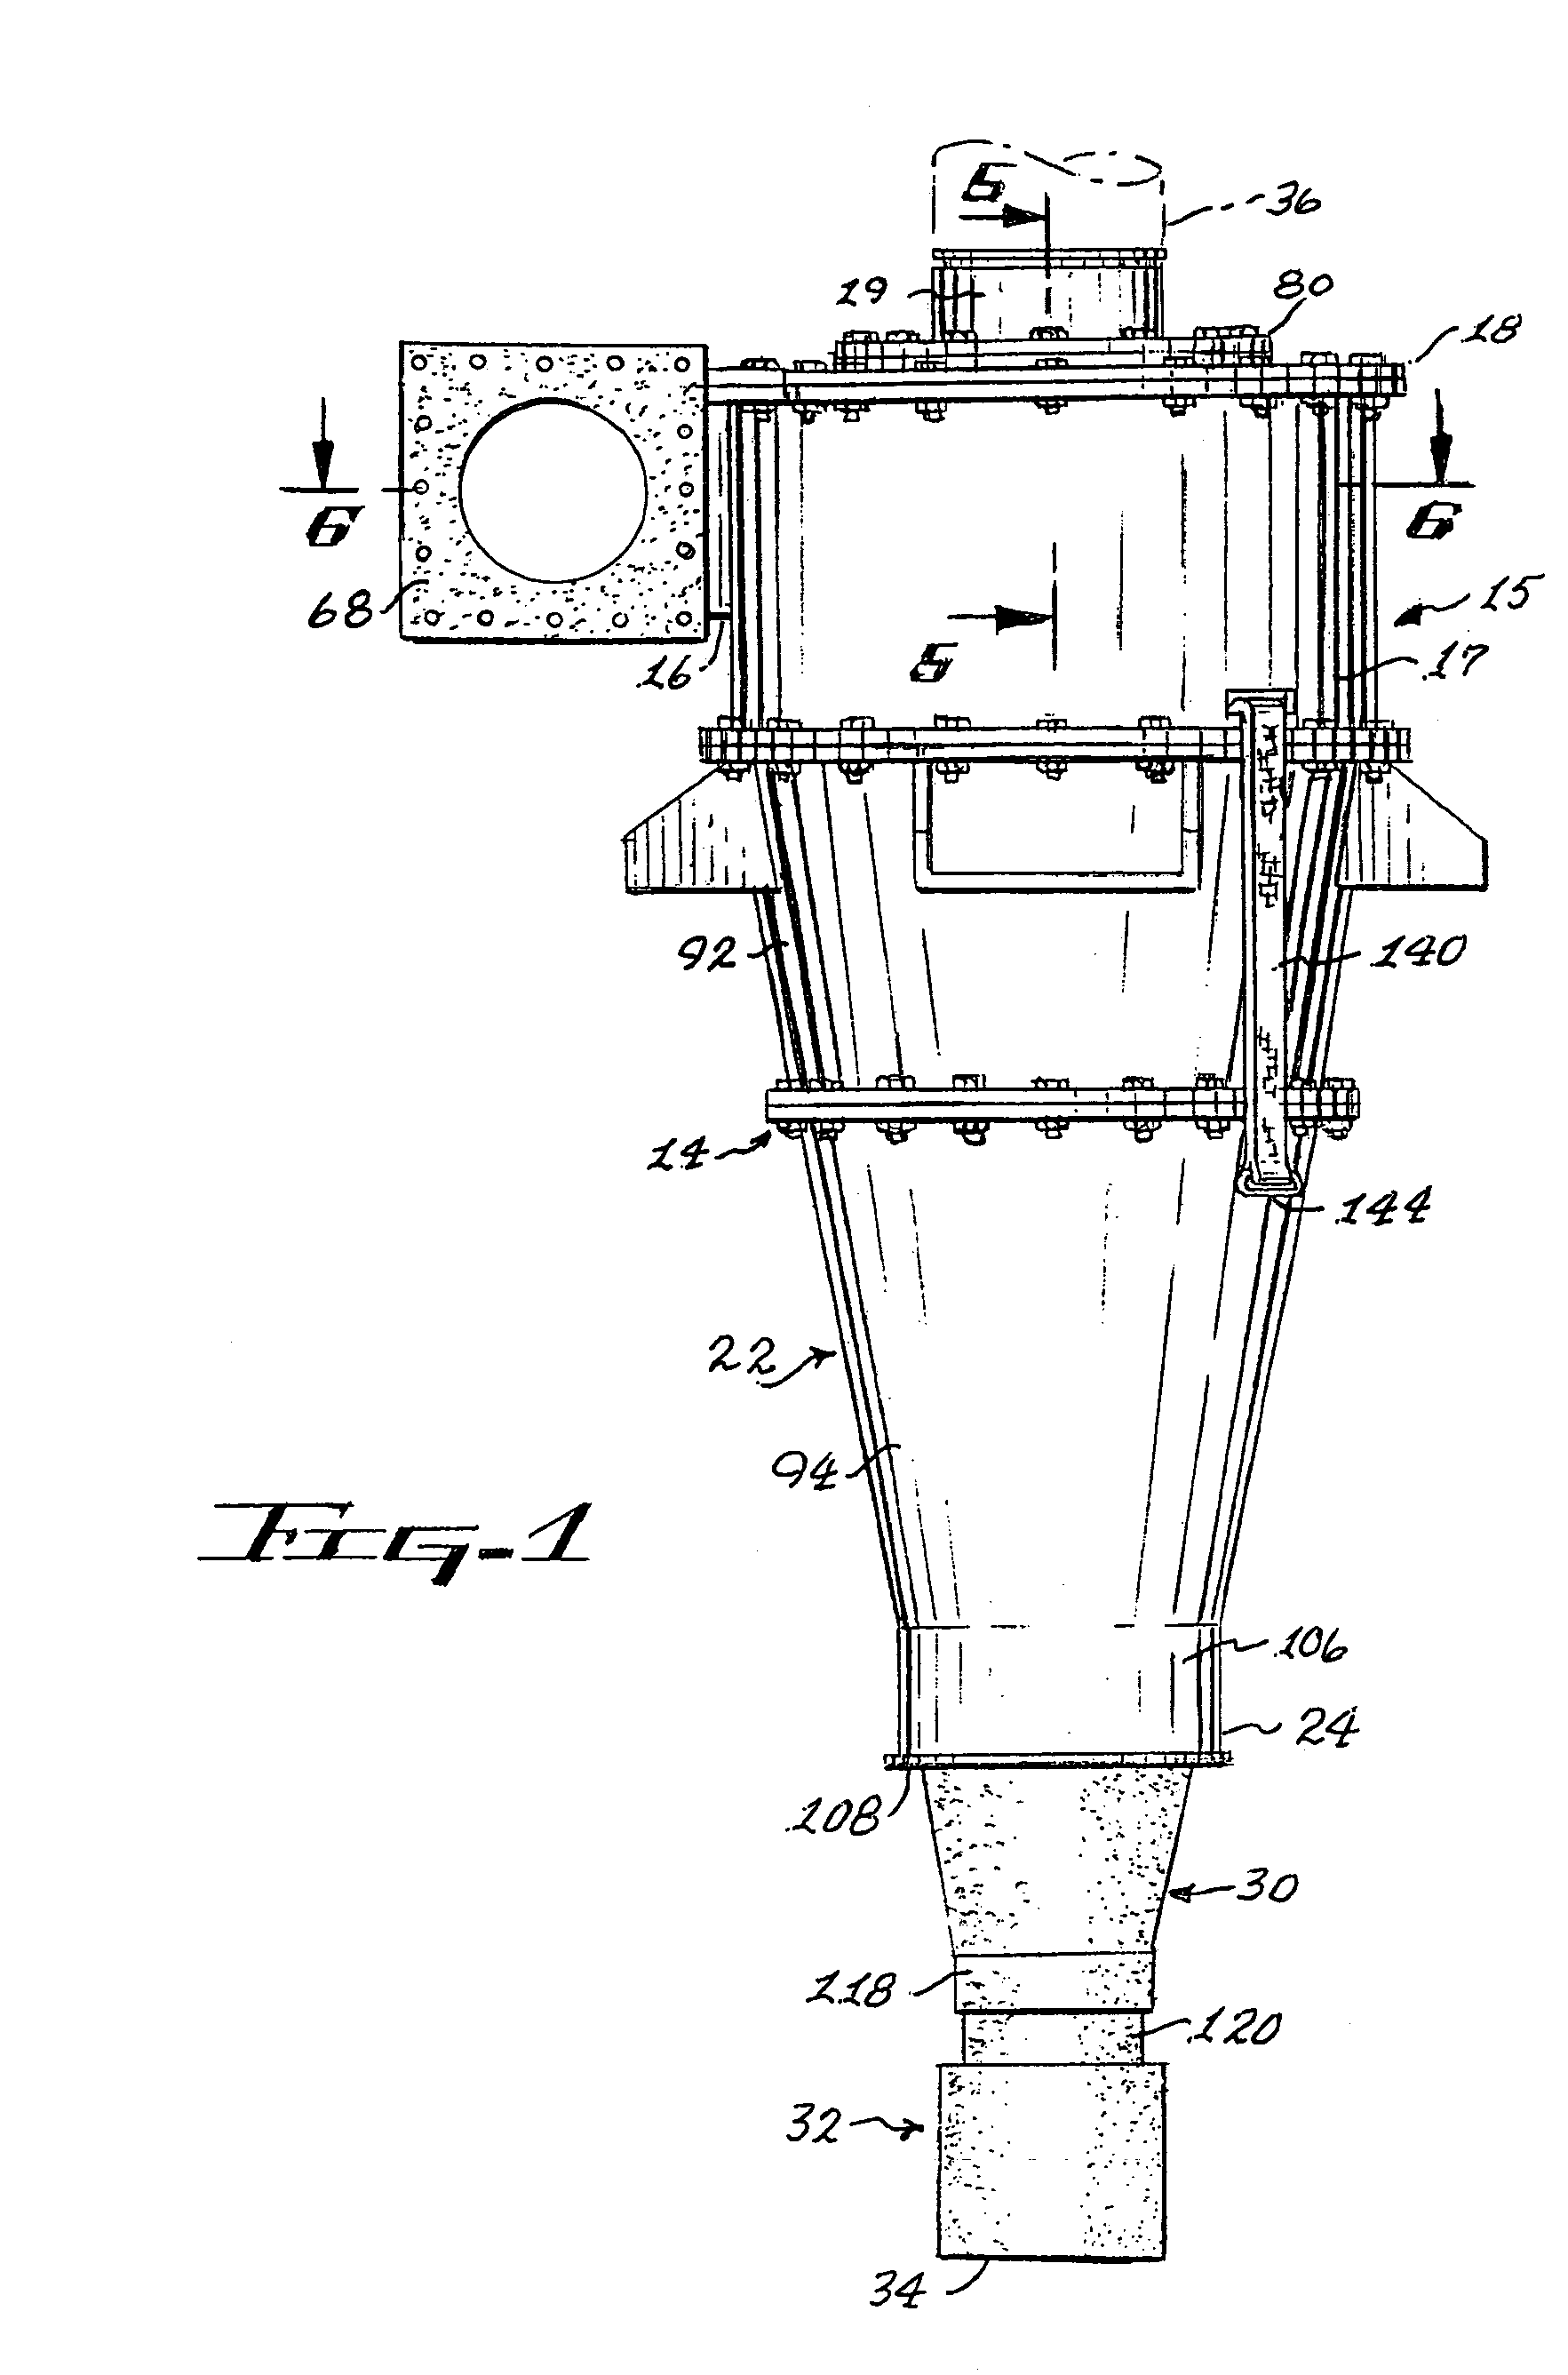 Cyclone with in-situ replaceable liner mechanisms and methods for accomplishing same